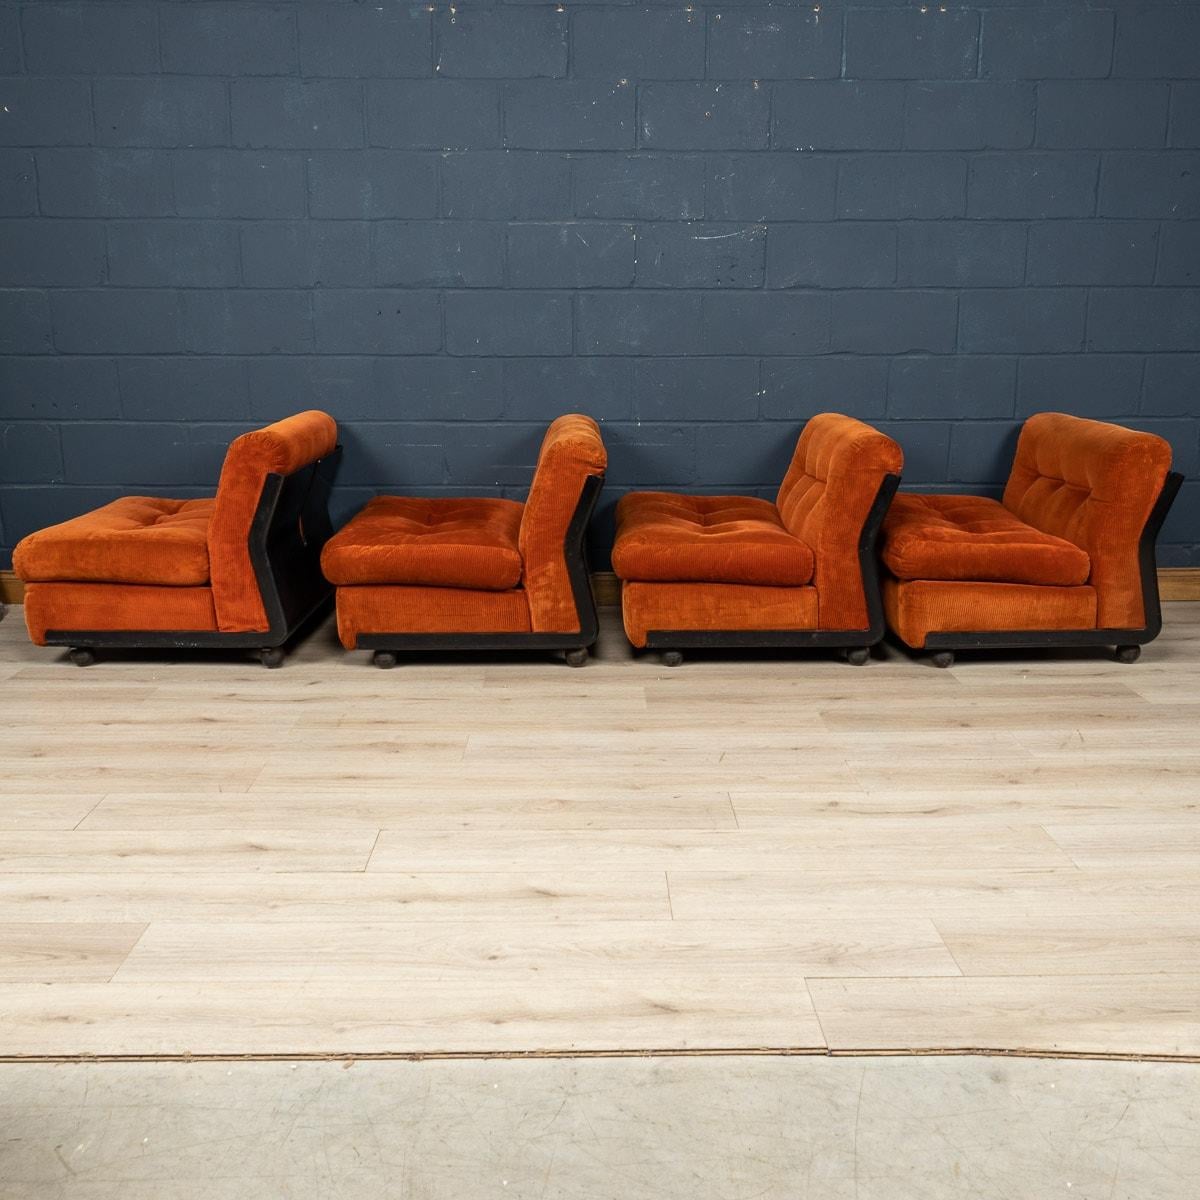 A 1980s C&B Italia “Amanta” modular or sectional four piece sofa designed by Mario Bellini in 1966. The four chairs are made from an enamelled Fiberlite structure raised from the ground on four round hard black rubber feet. Each chair has three